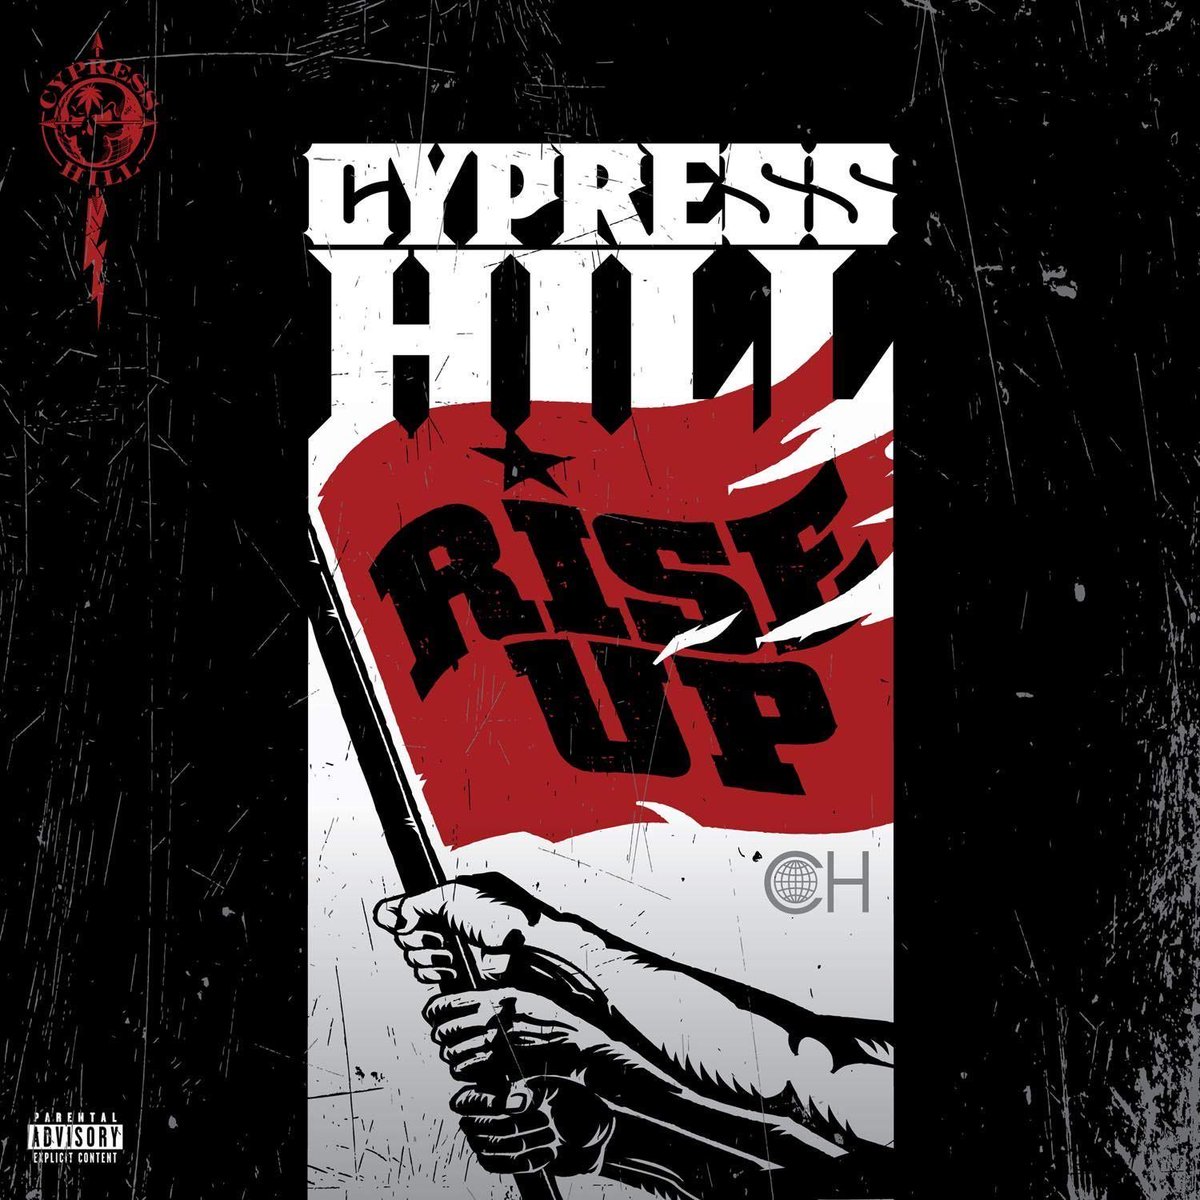 April 20, 2010 @cypresshill released Rise Up

Some Production Includes @DJ_Muggs @DJKhalil @PeteRock @JakeUno @mikeshinoda @daronmalakian @IamJimJonsin @SickJacken and more 

Some Features Include @Alchemist @Evidence @OGEverlast @pitbull @MarcAnthony and more